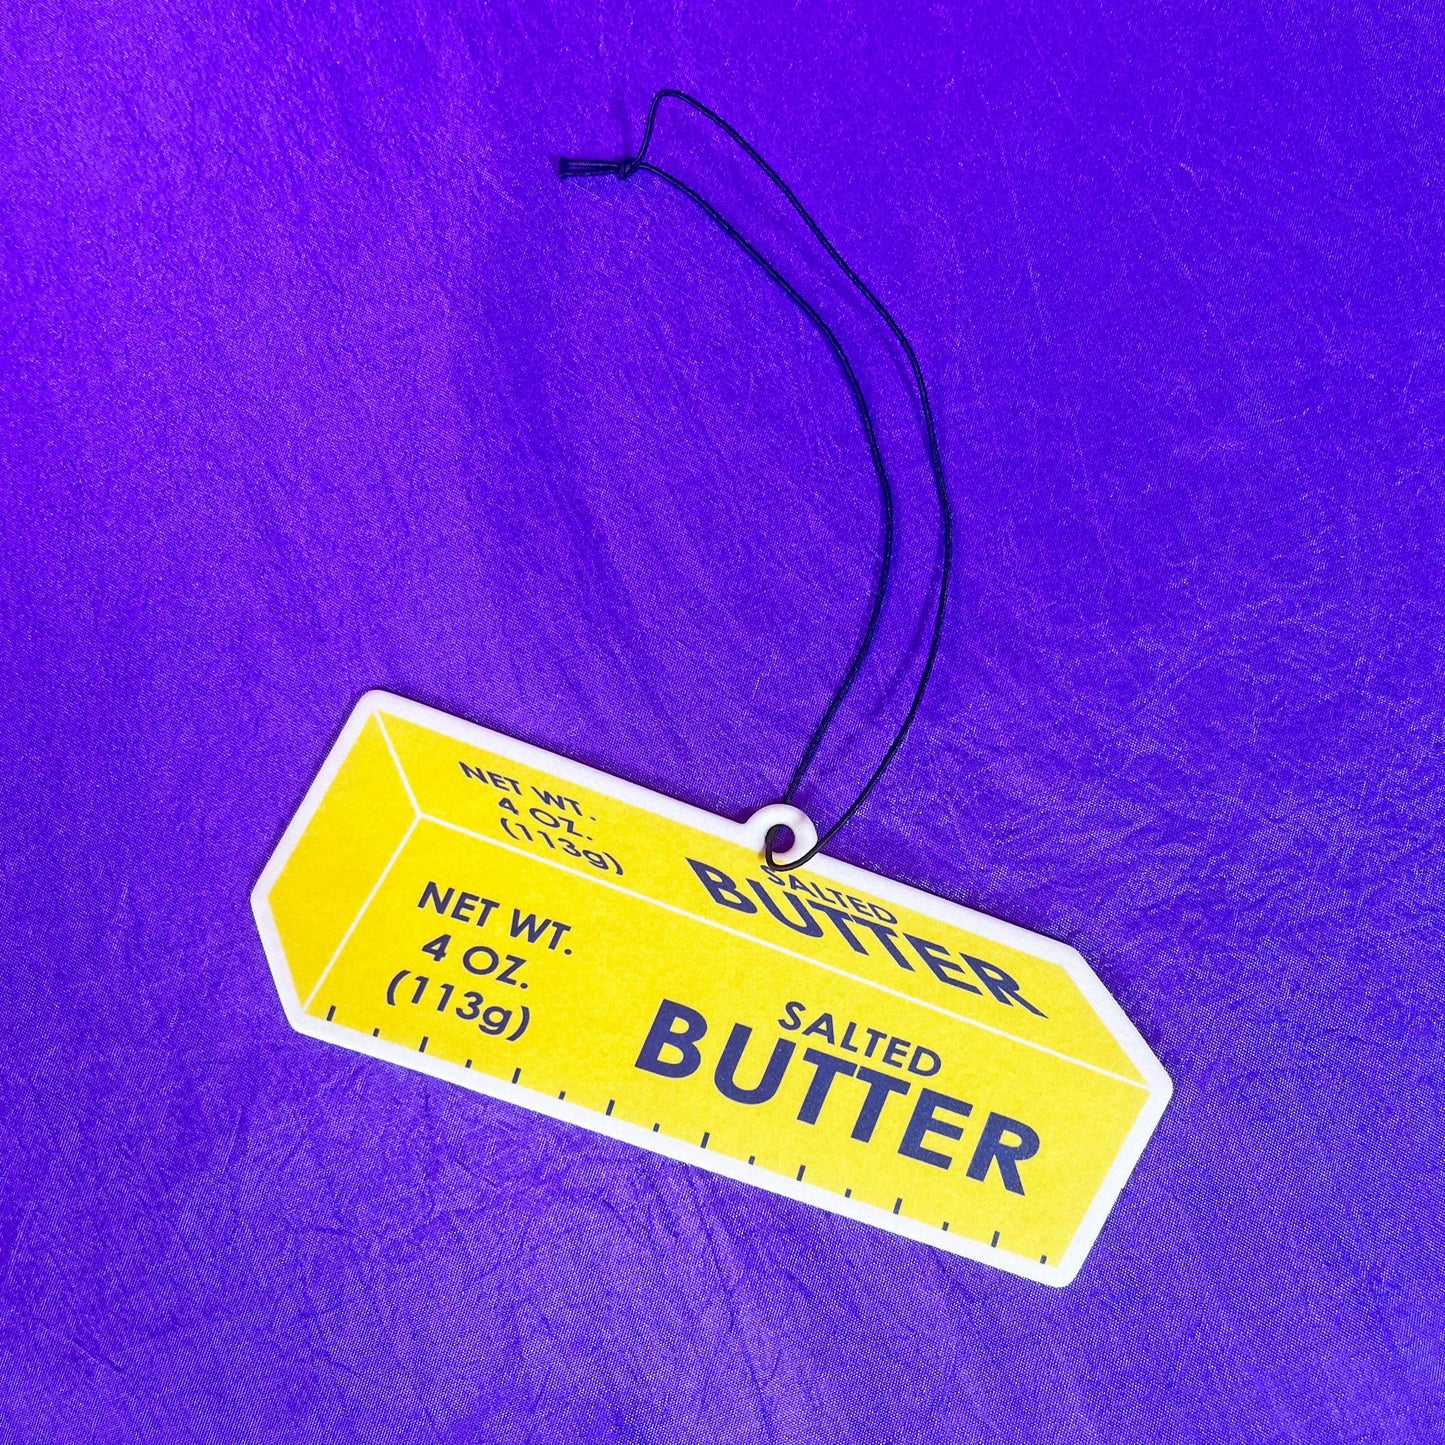 Air freshener made to look like a stick of butter. Includes string for hanging 